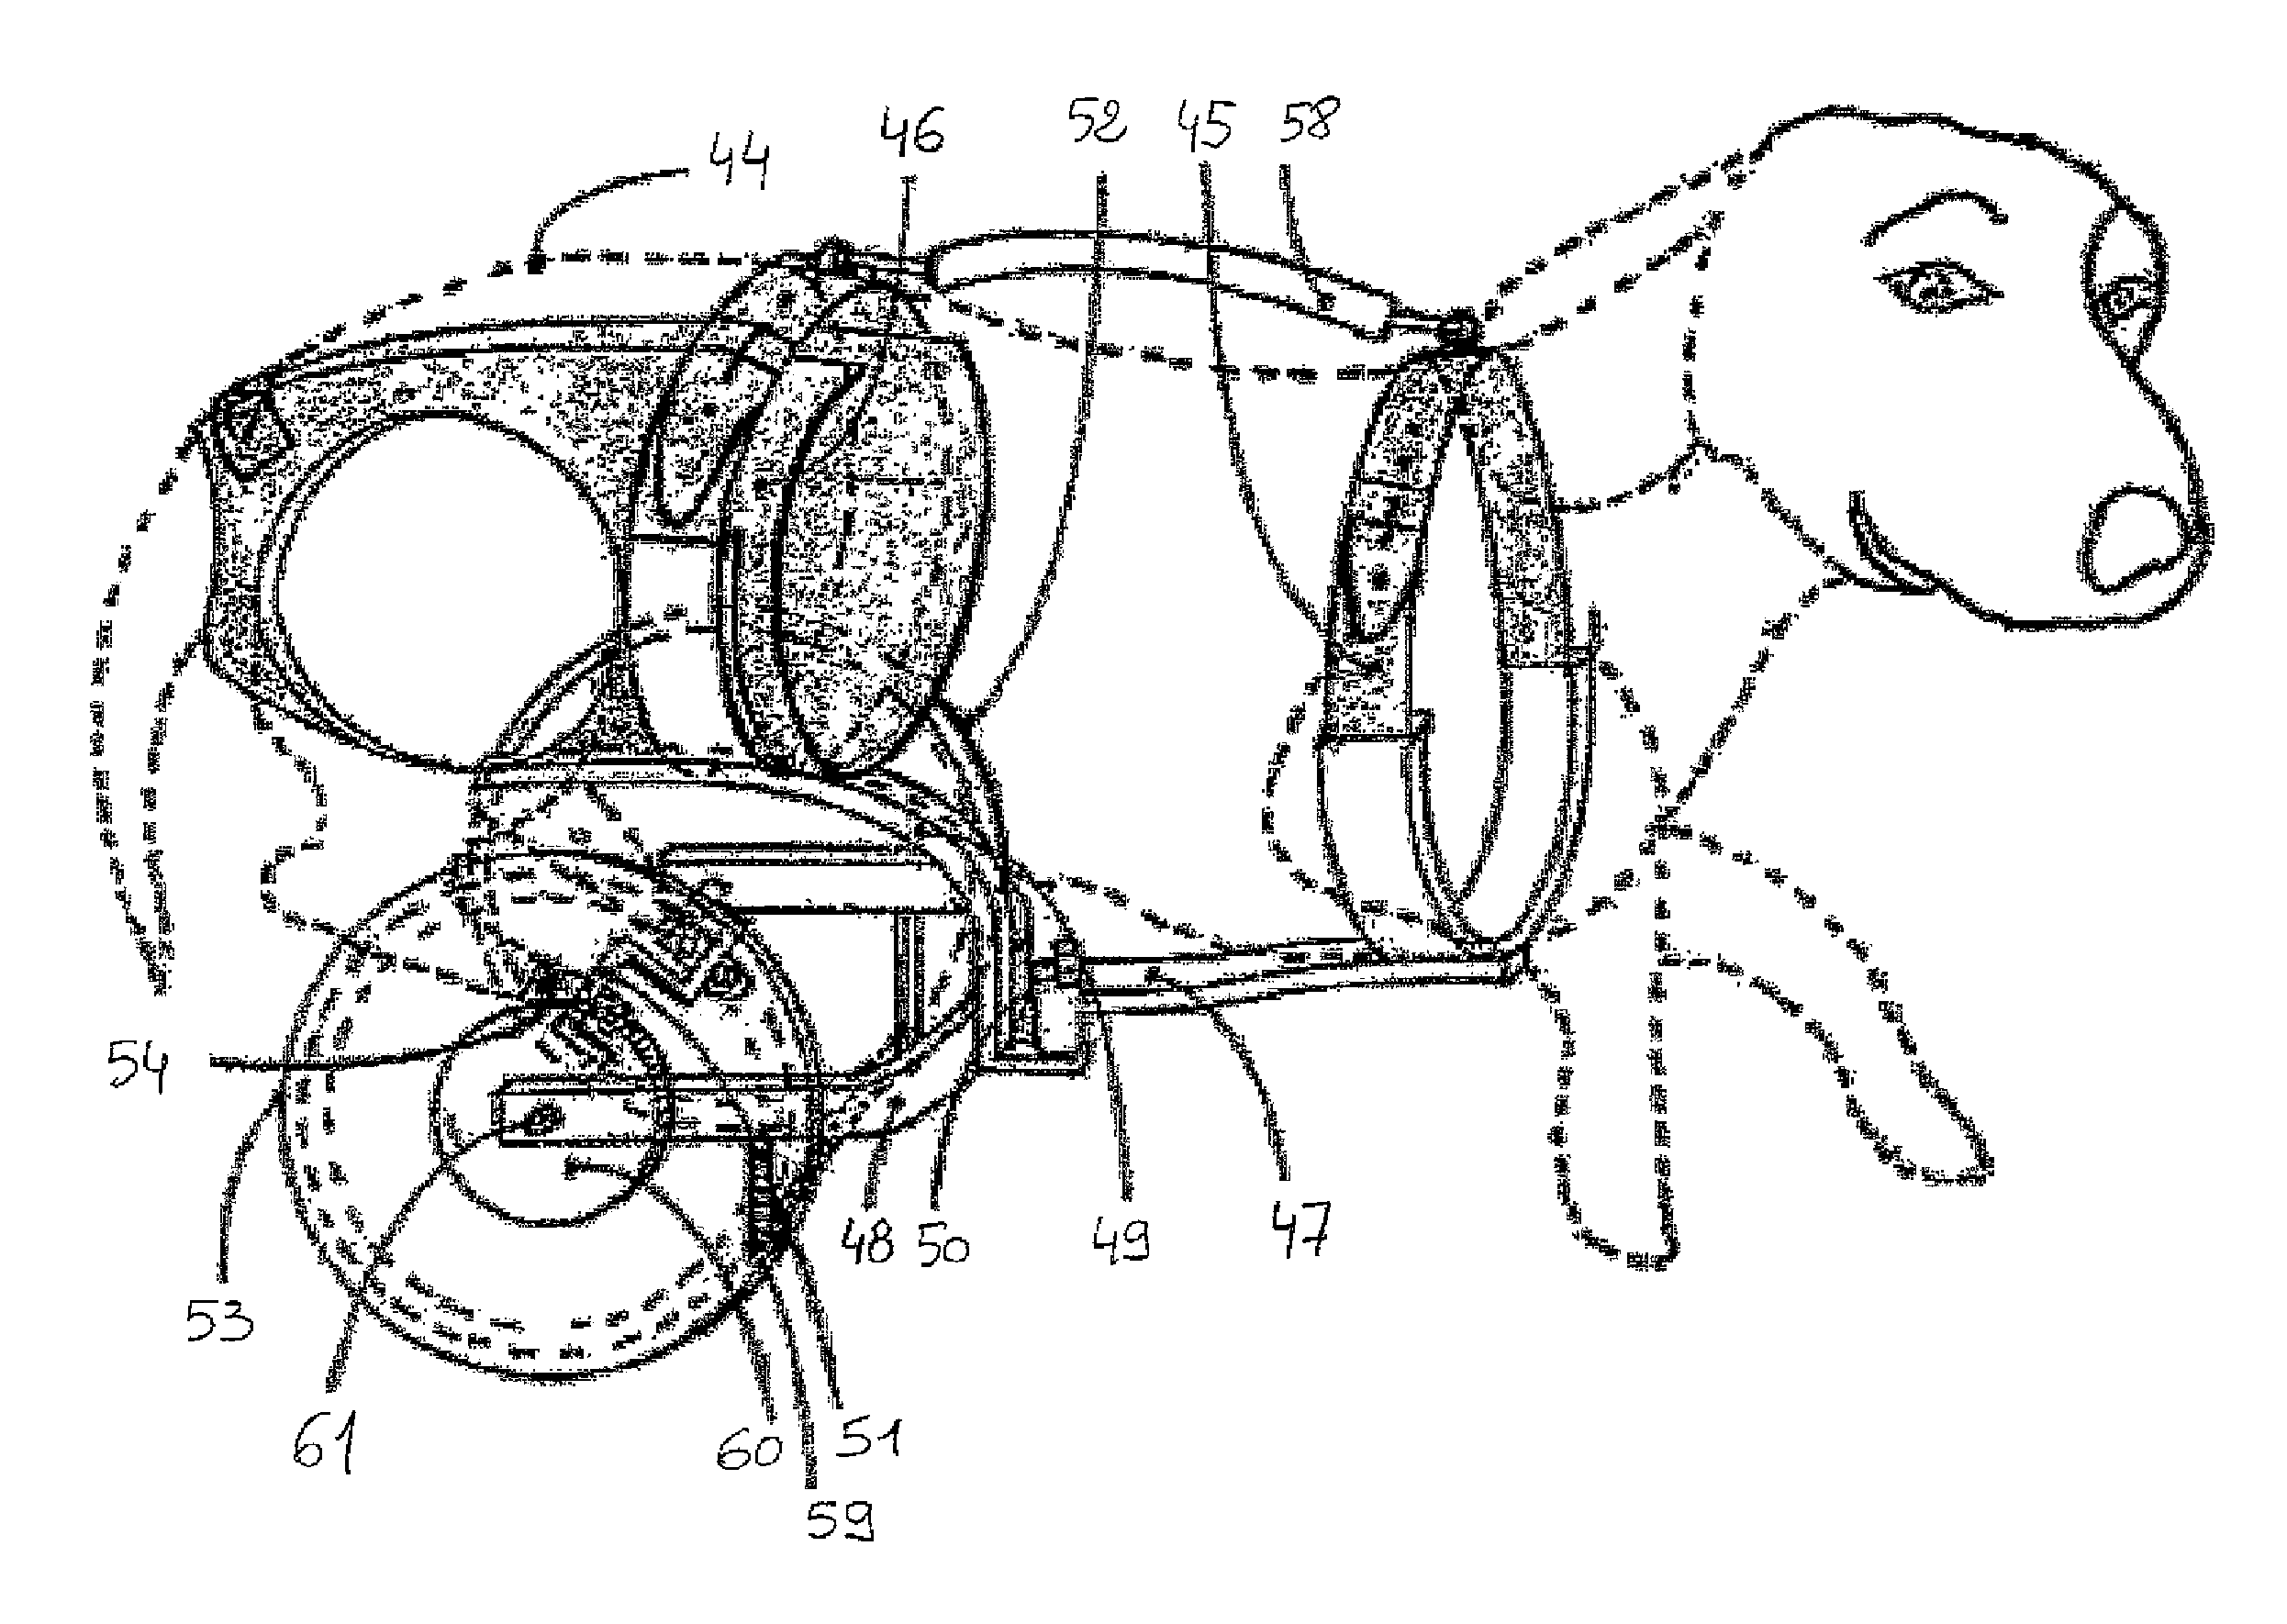 Rehabilitation or mobility assistance device for a quadruped animal